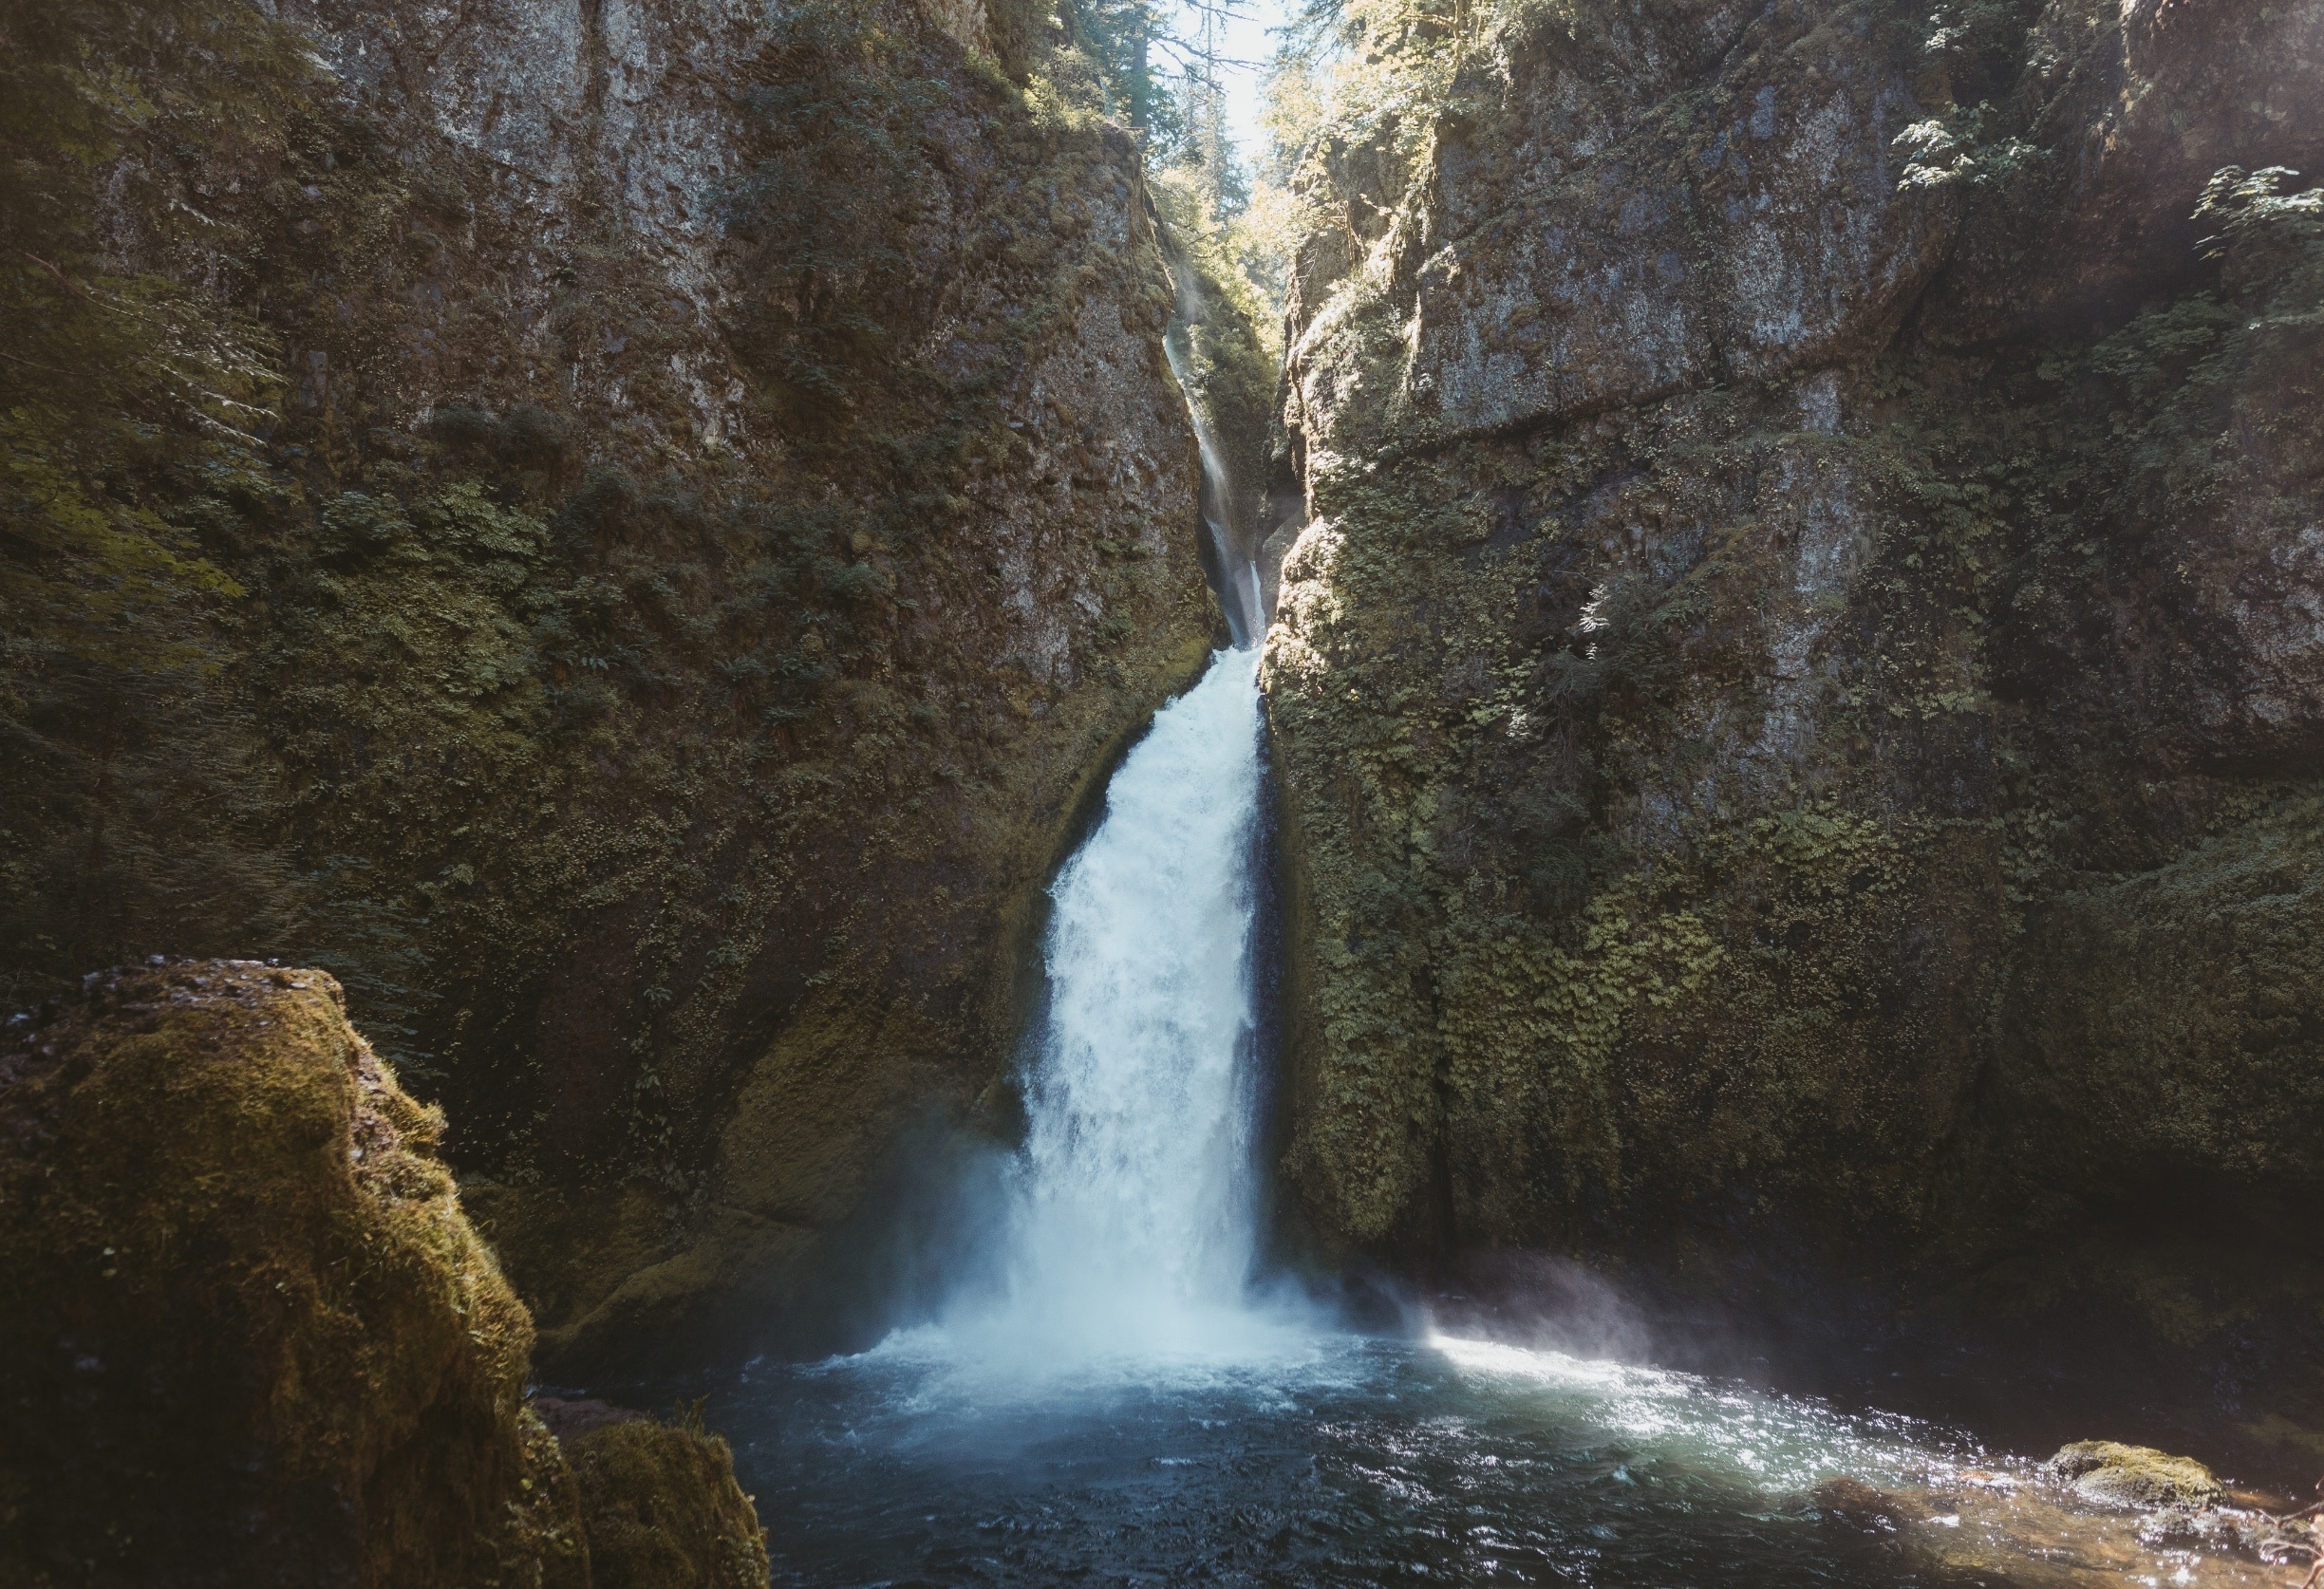 Explore just one of Oregon's many waterfalls.